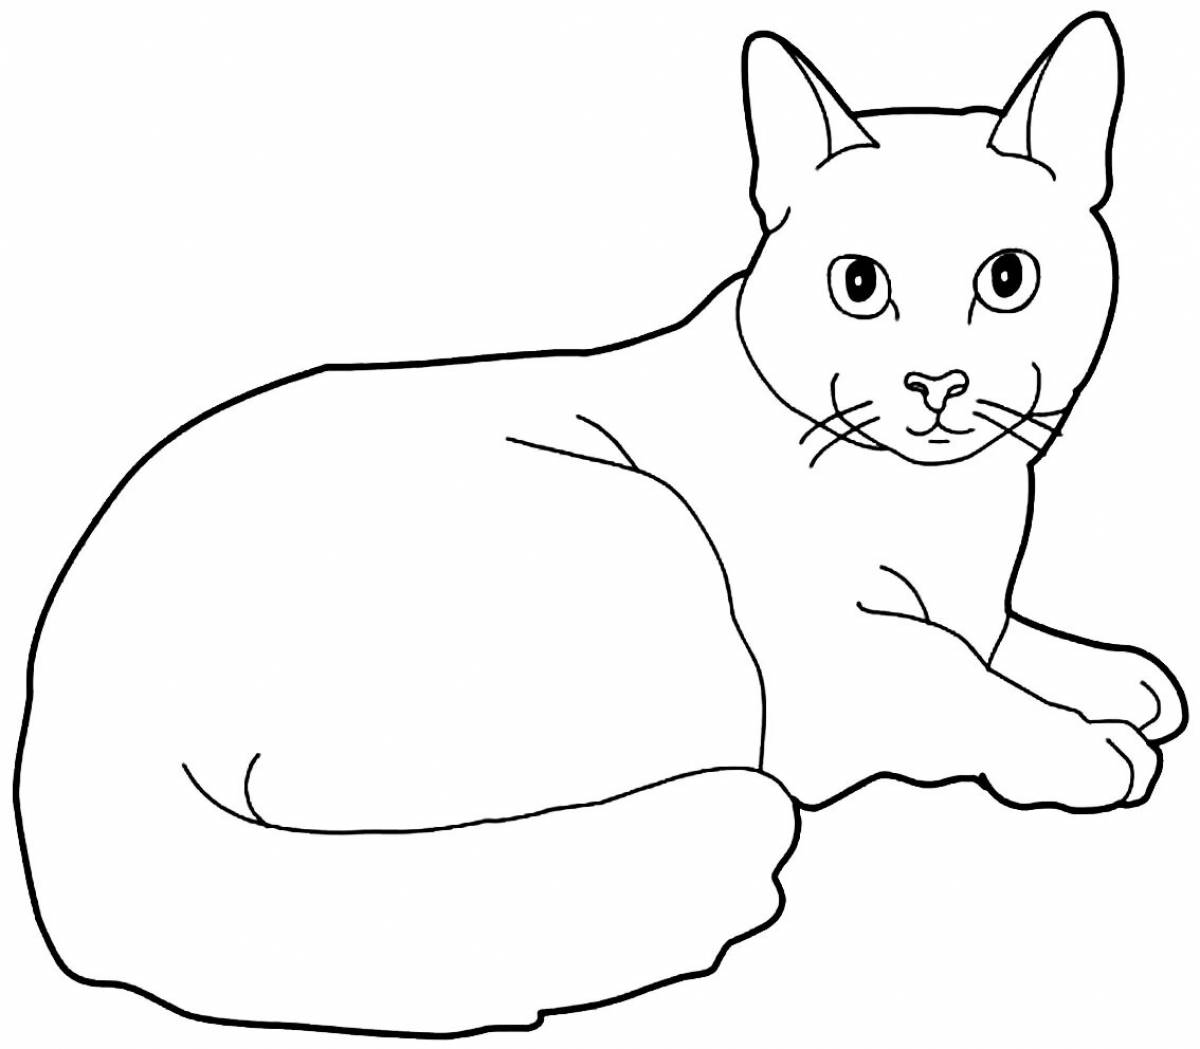 Sweet pencil cat coloring page